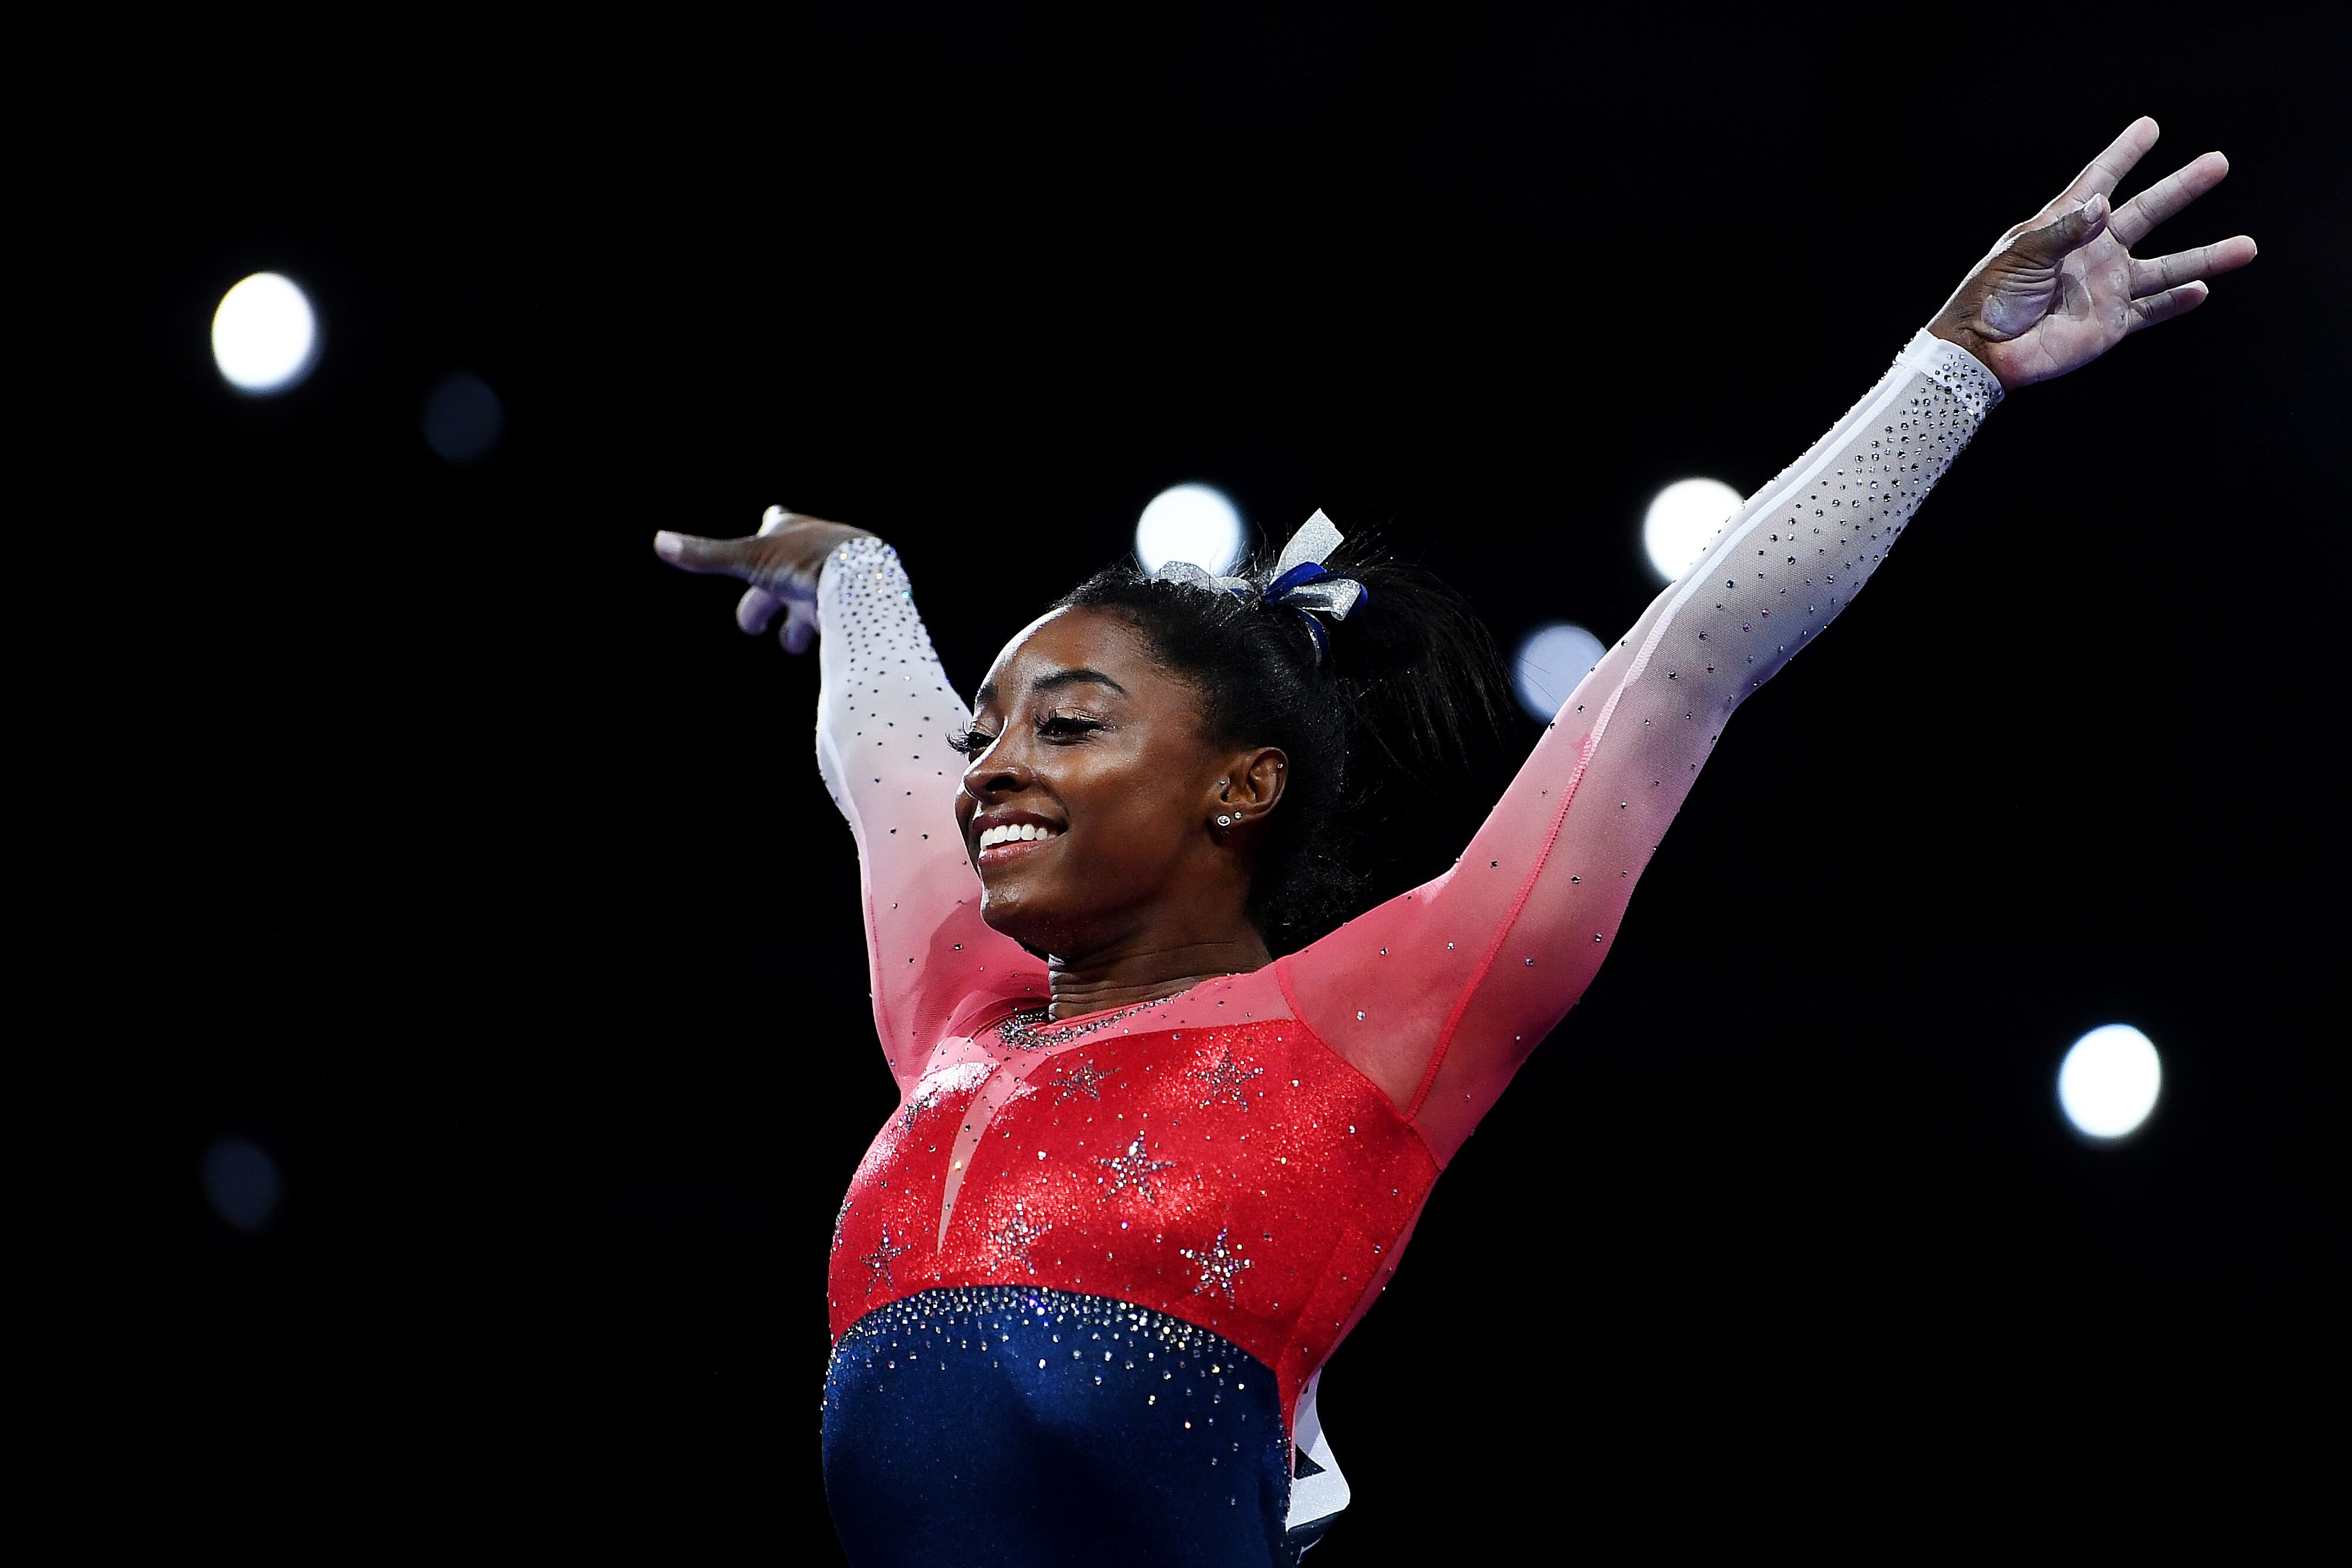 Simone Biles during the FIG Artistic Gymnastics World Championships on Oct. 08, 2019. | Photo: Getty Images